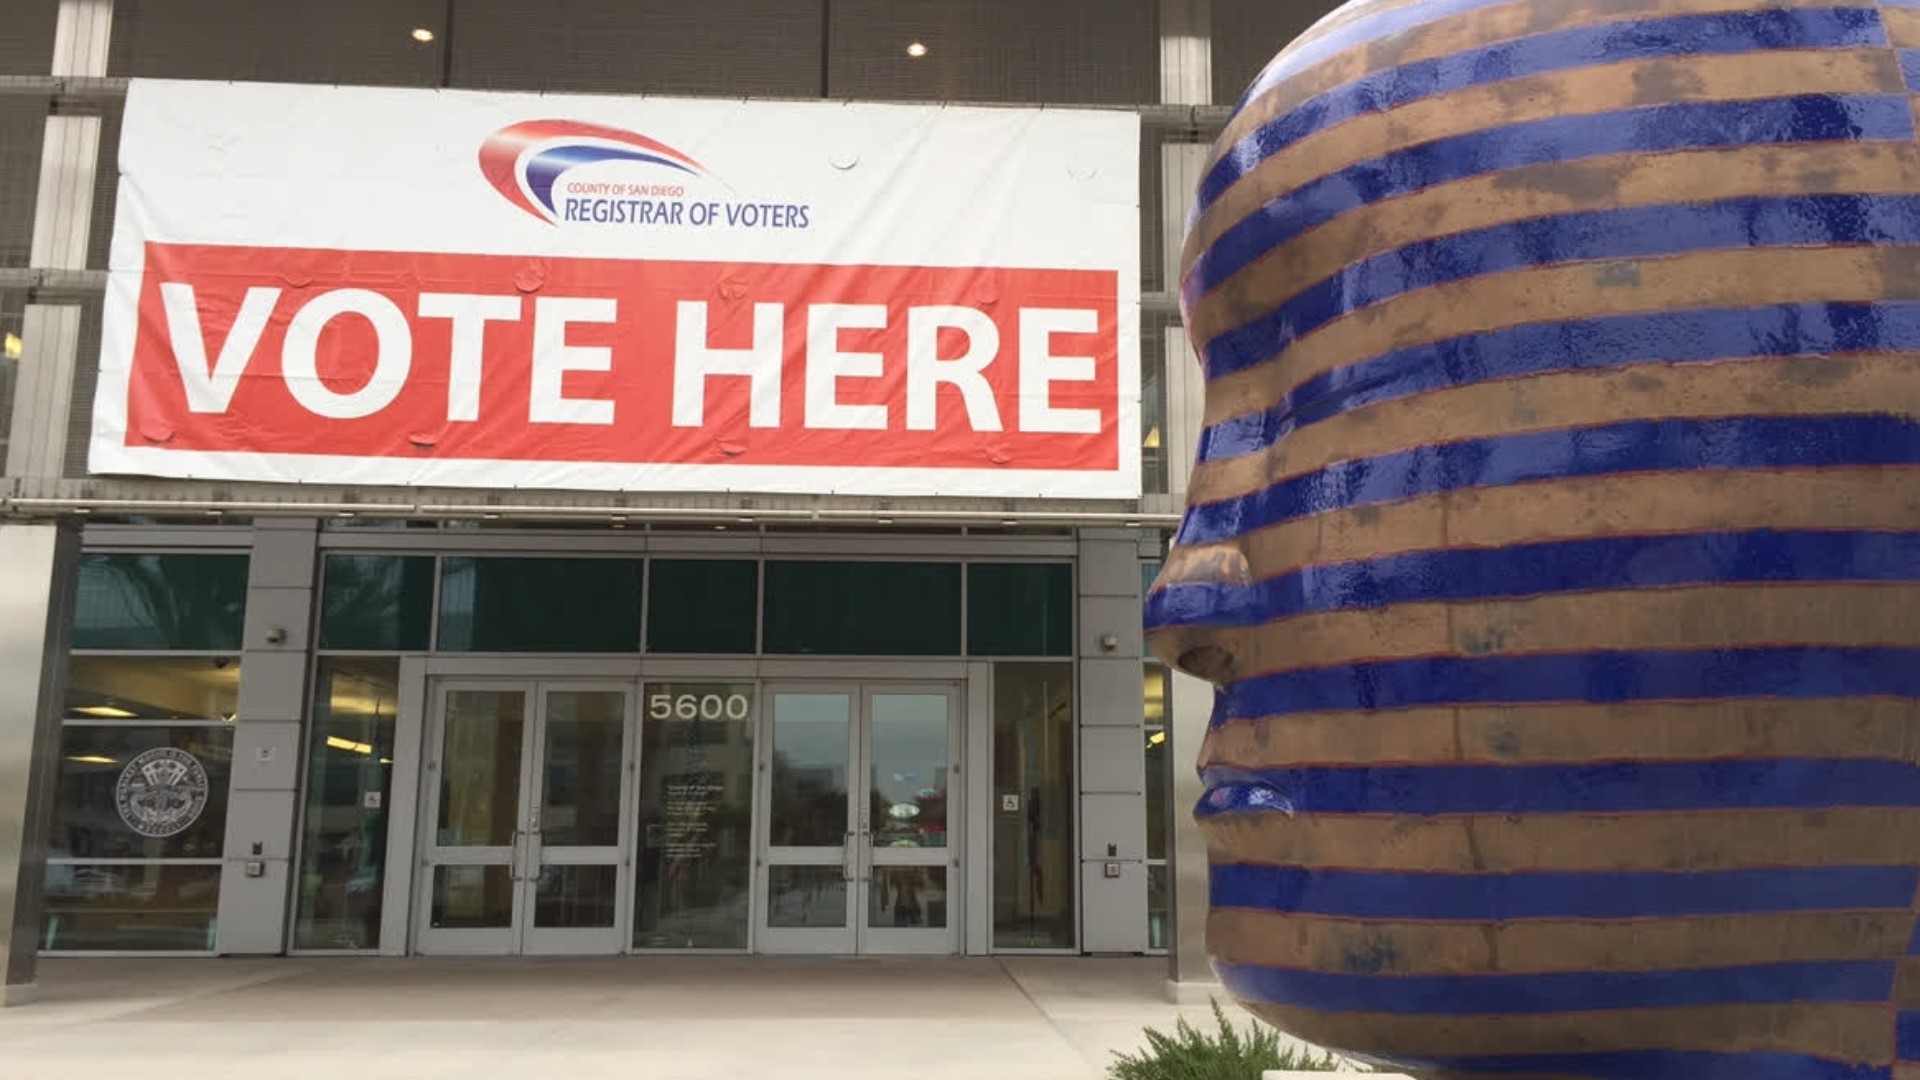 Those who want to vote in person can vote early at their assigned polling place from Saturday, Oct. 31 through Monday, Nov. 2 from 8 a.m. to 5 p.m.